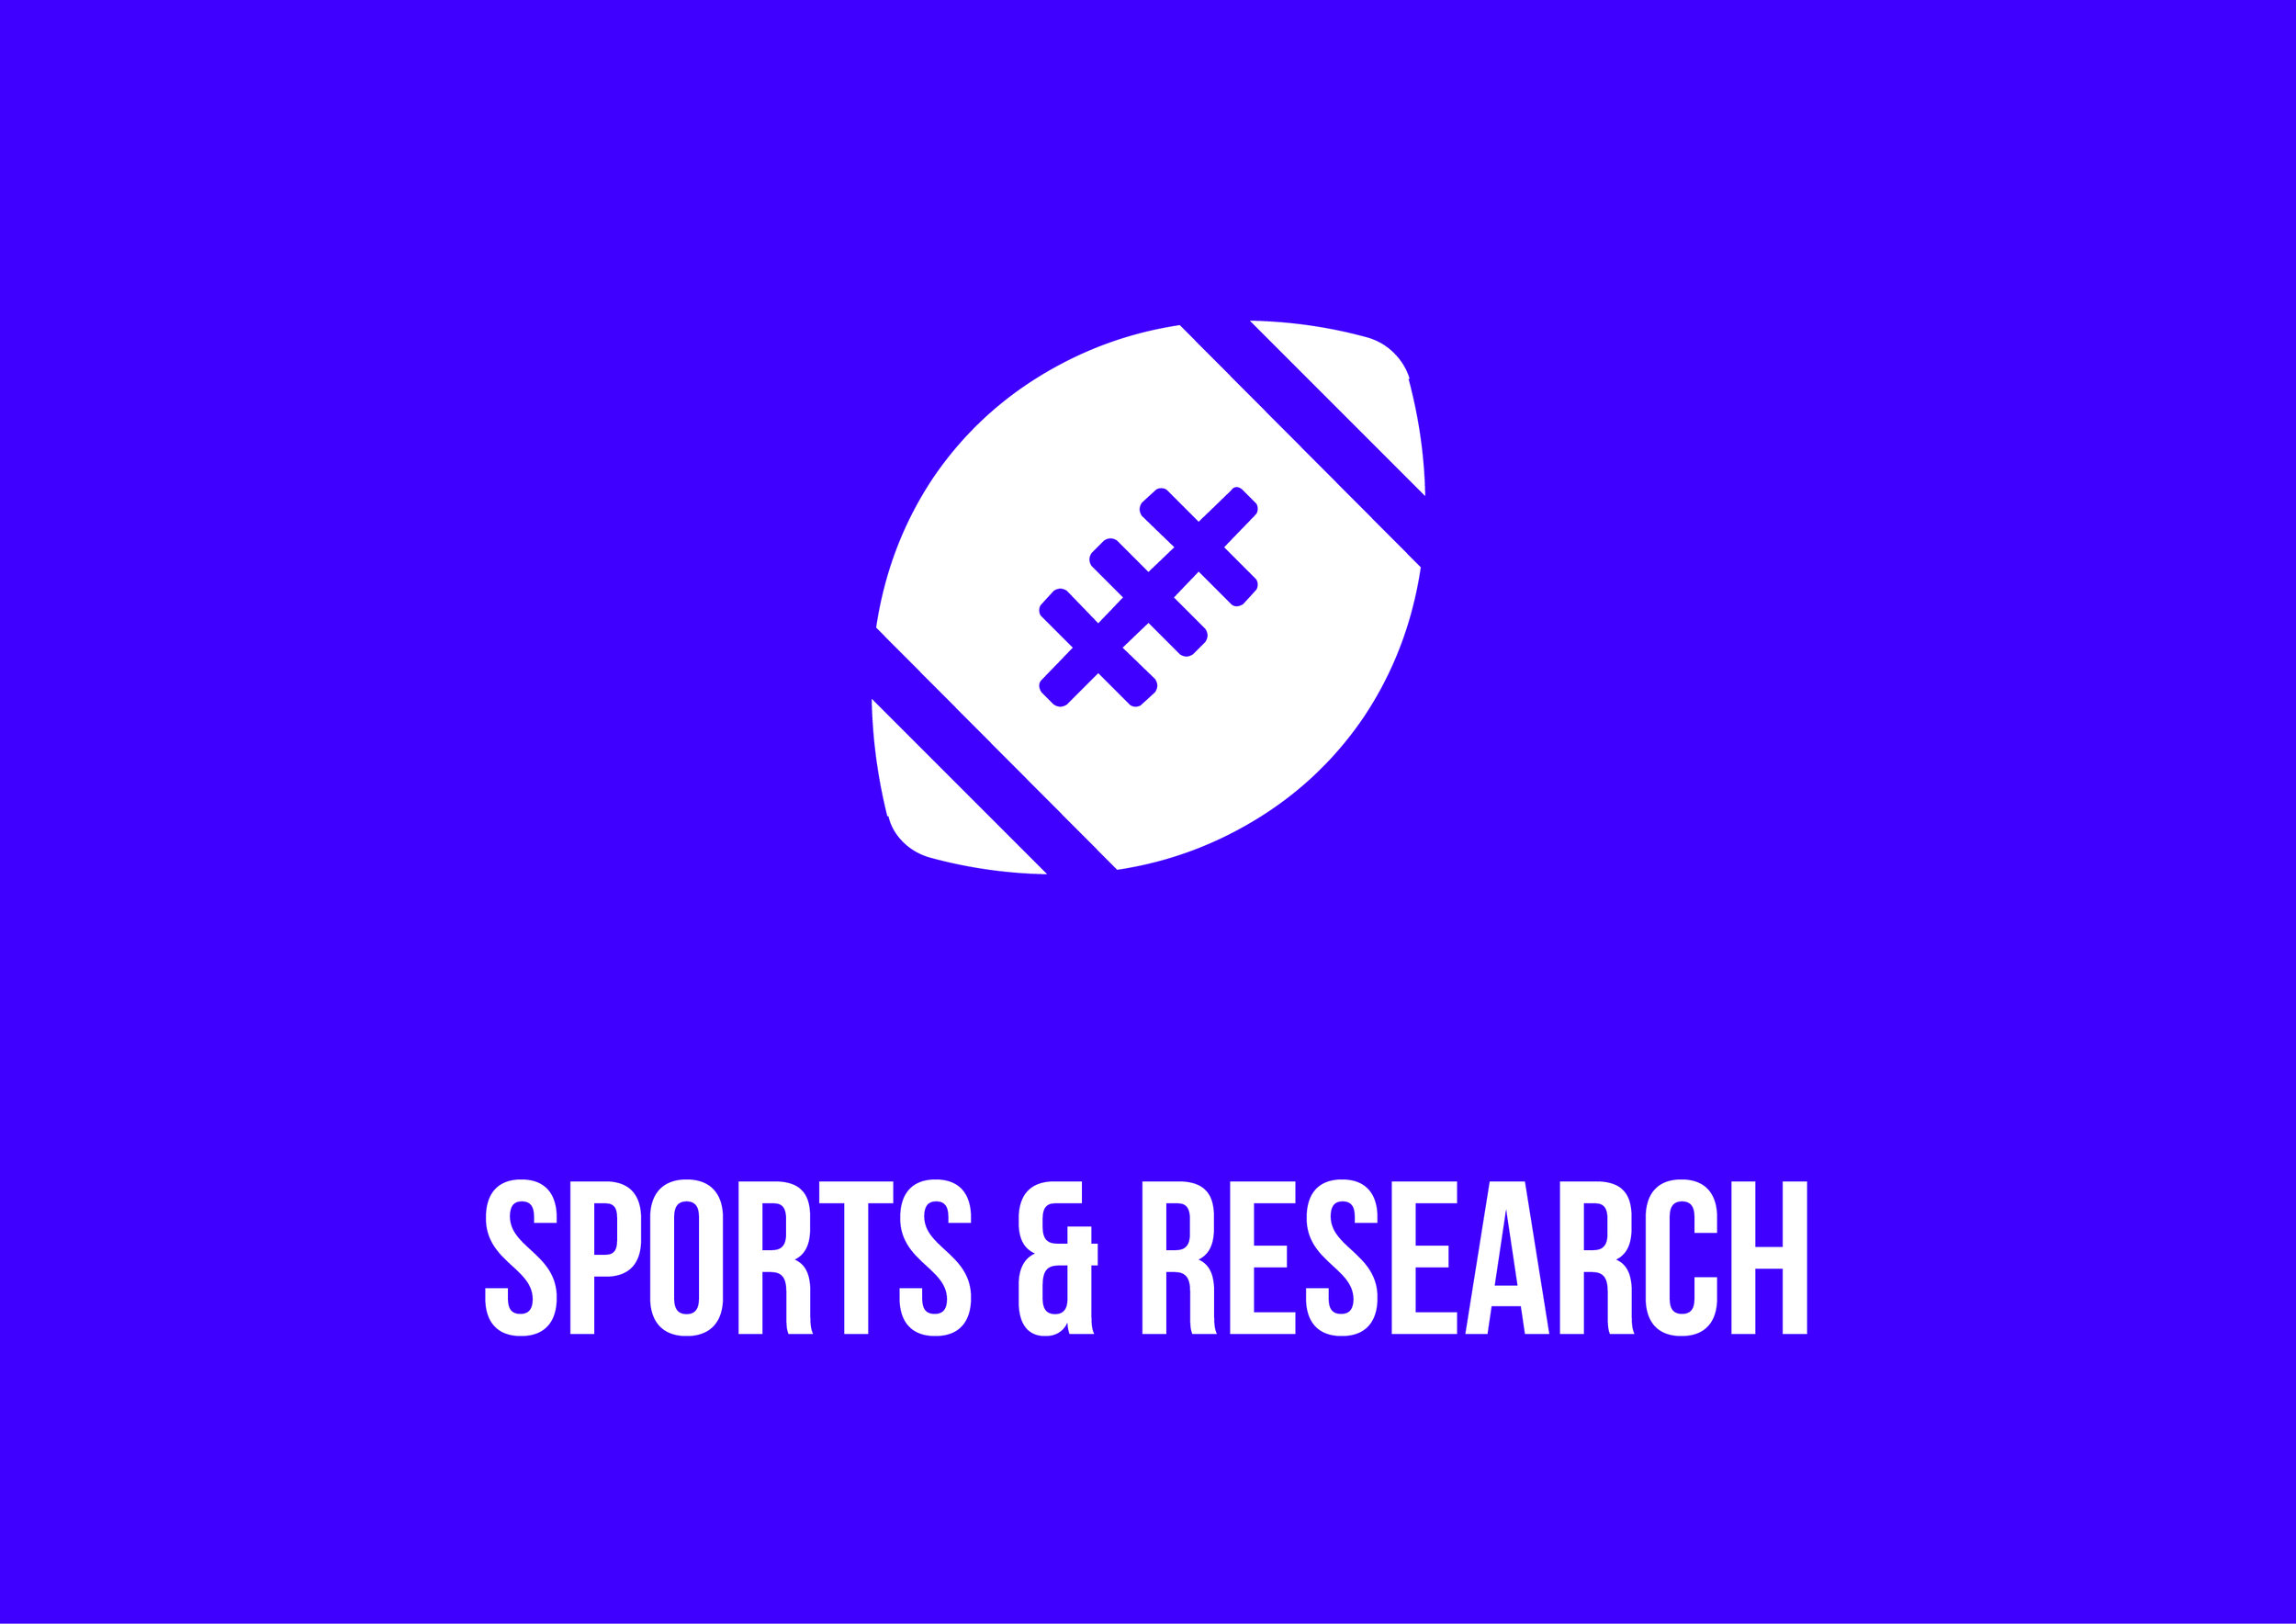 Contribution to Sports and Research